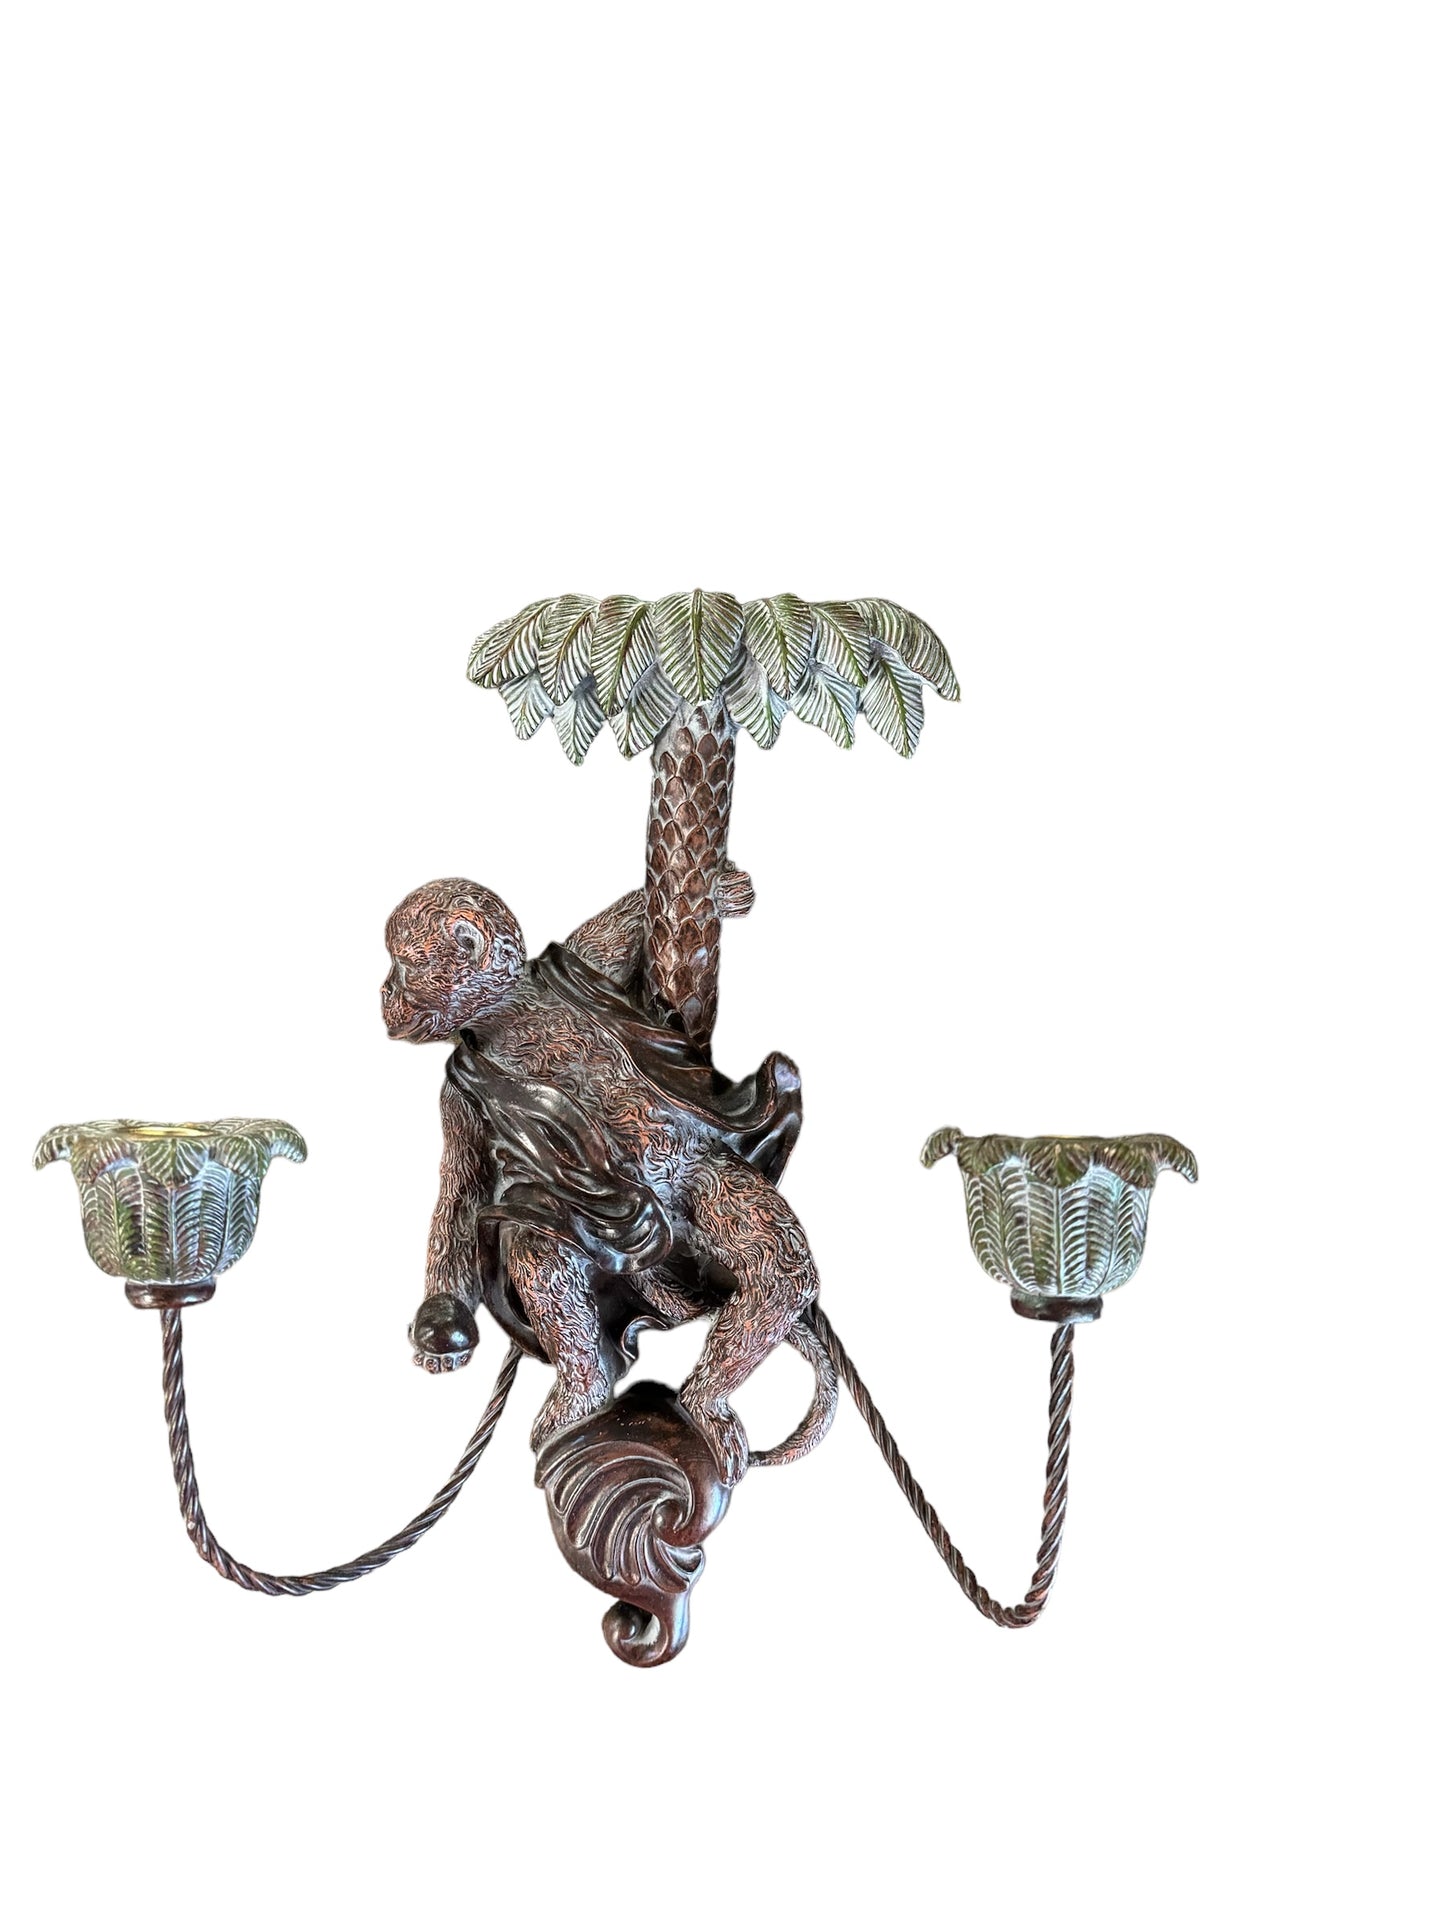 Vintage Wall Sconce - Monkey in a coconut tree